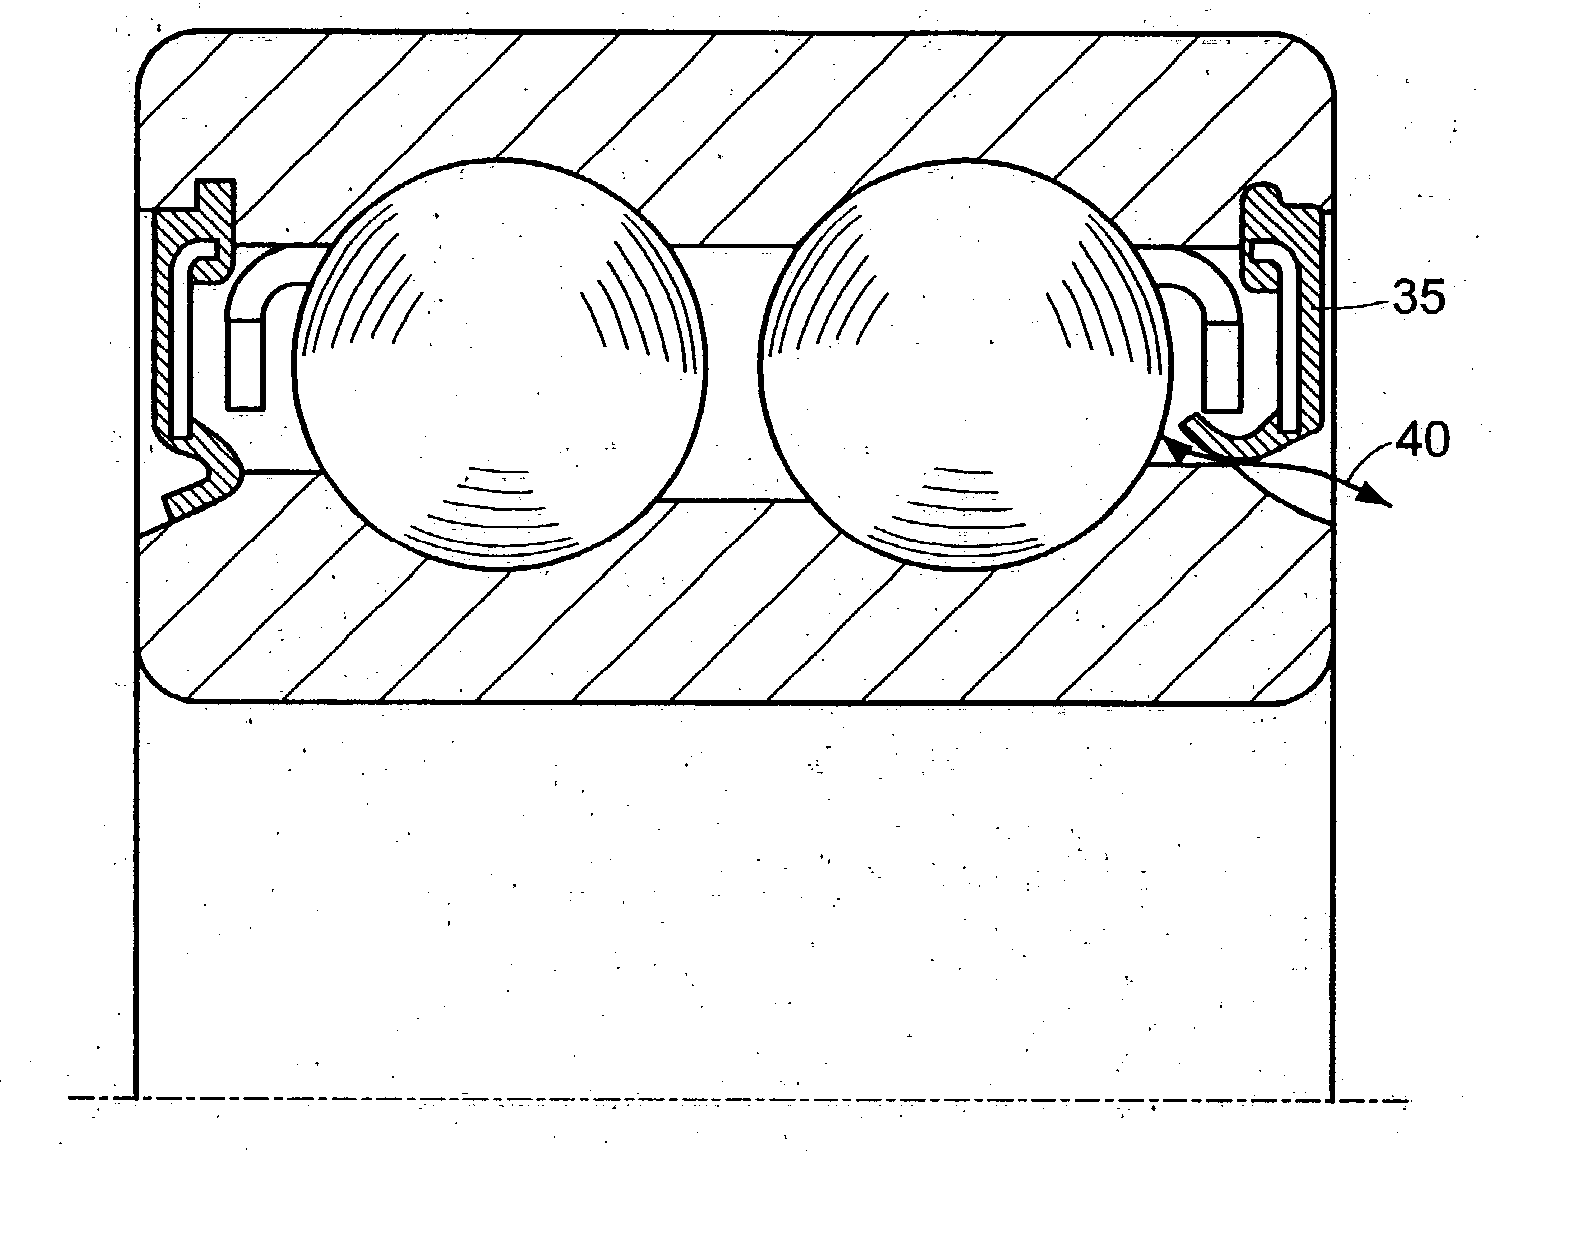 Method and device for bearing seal pressure relief